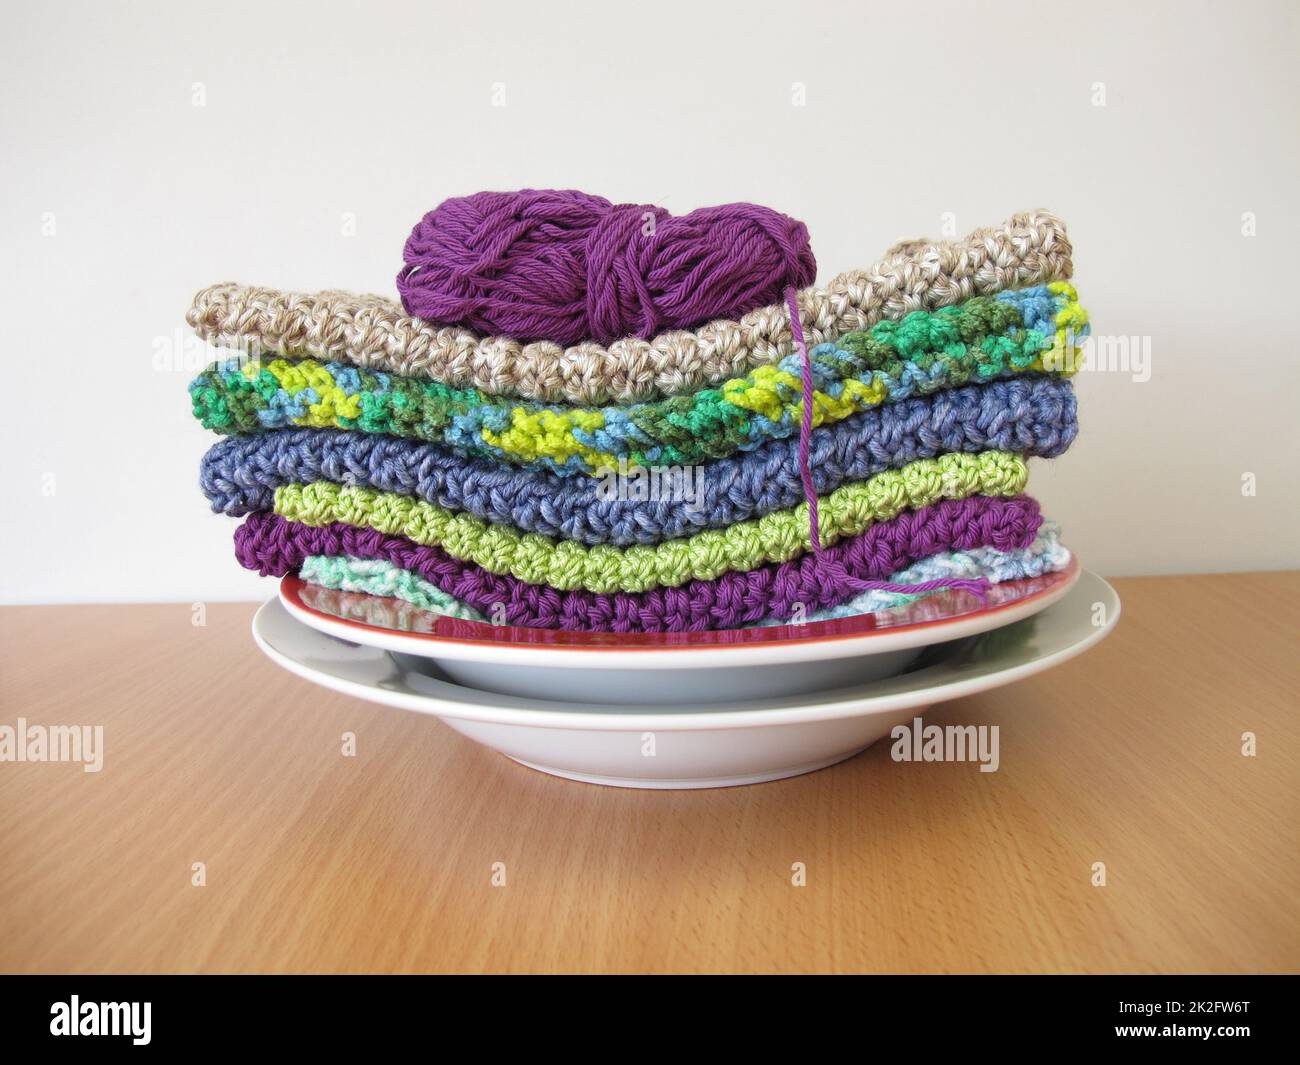 Washable crocheted and knitted dishcloths from wool Stock Photo